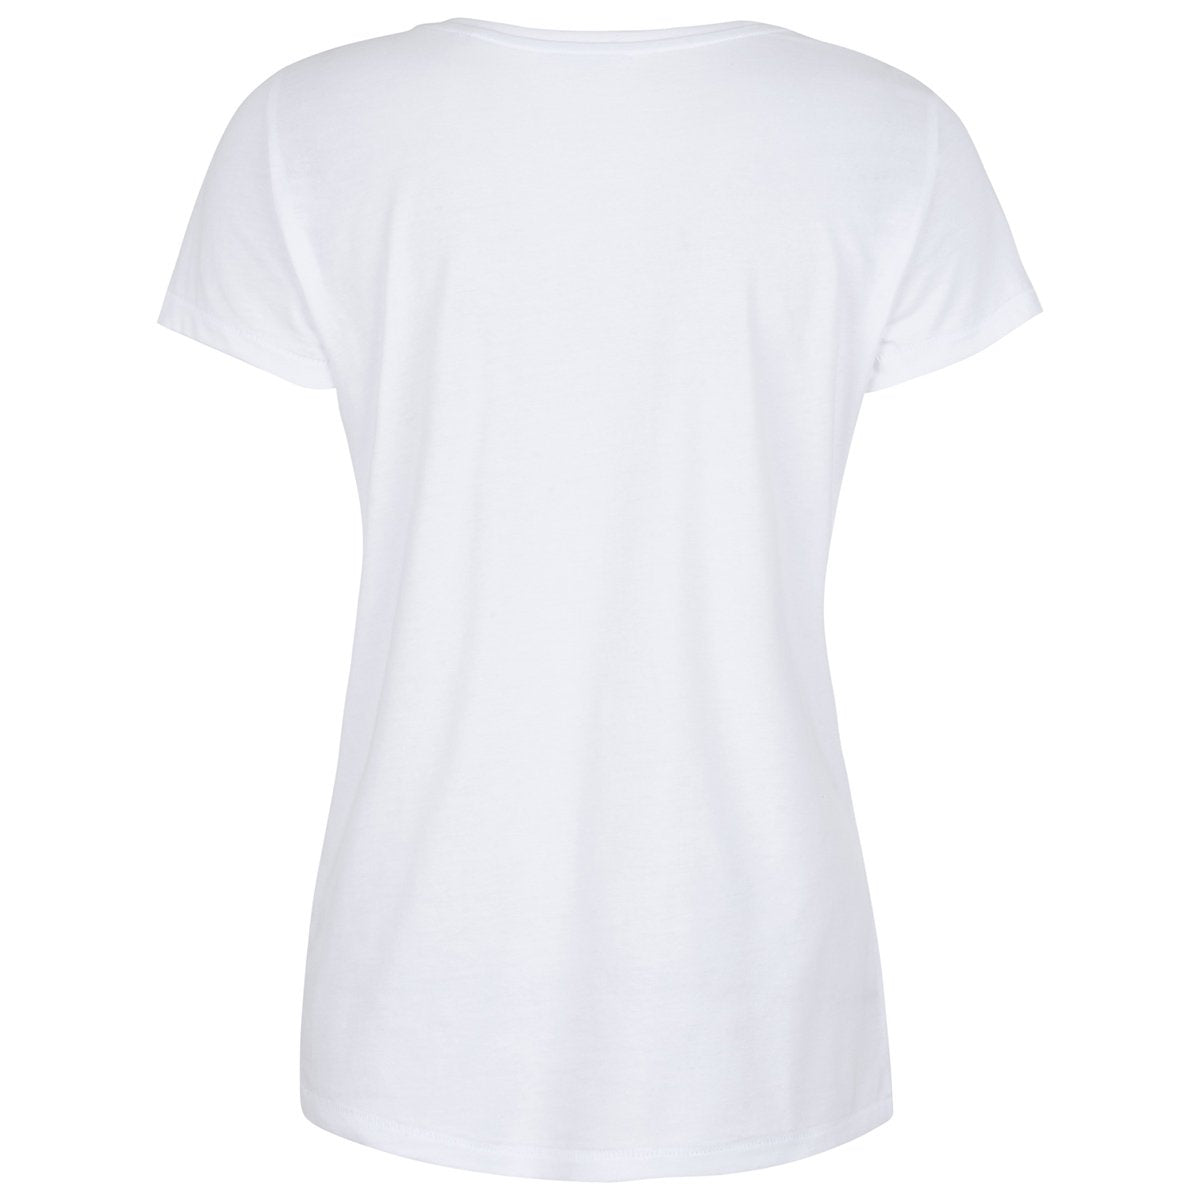 Ridley White Chic Minimalist Style X T-shirt Front View